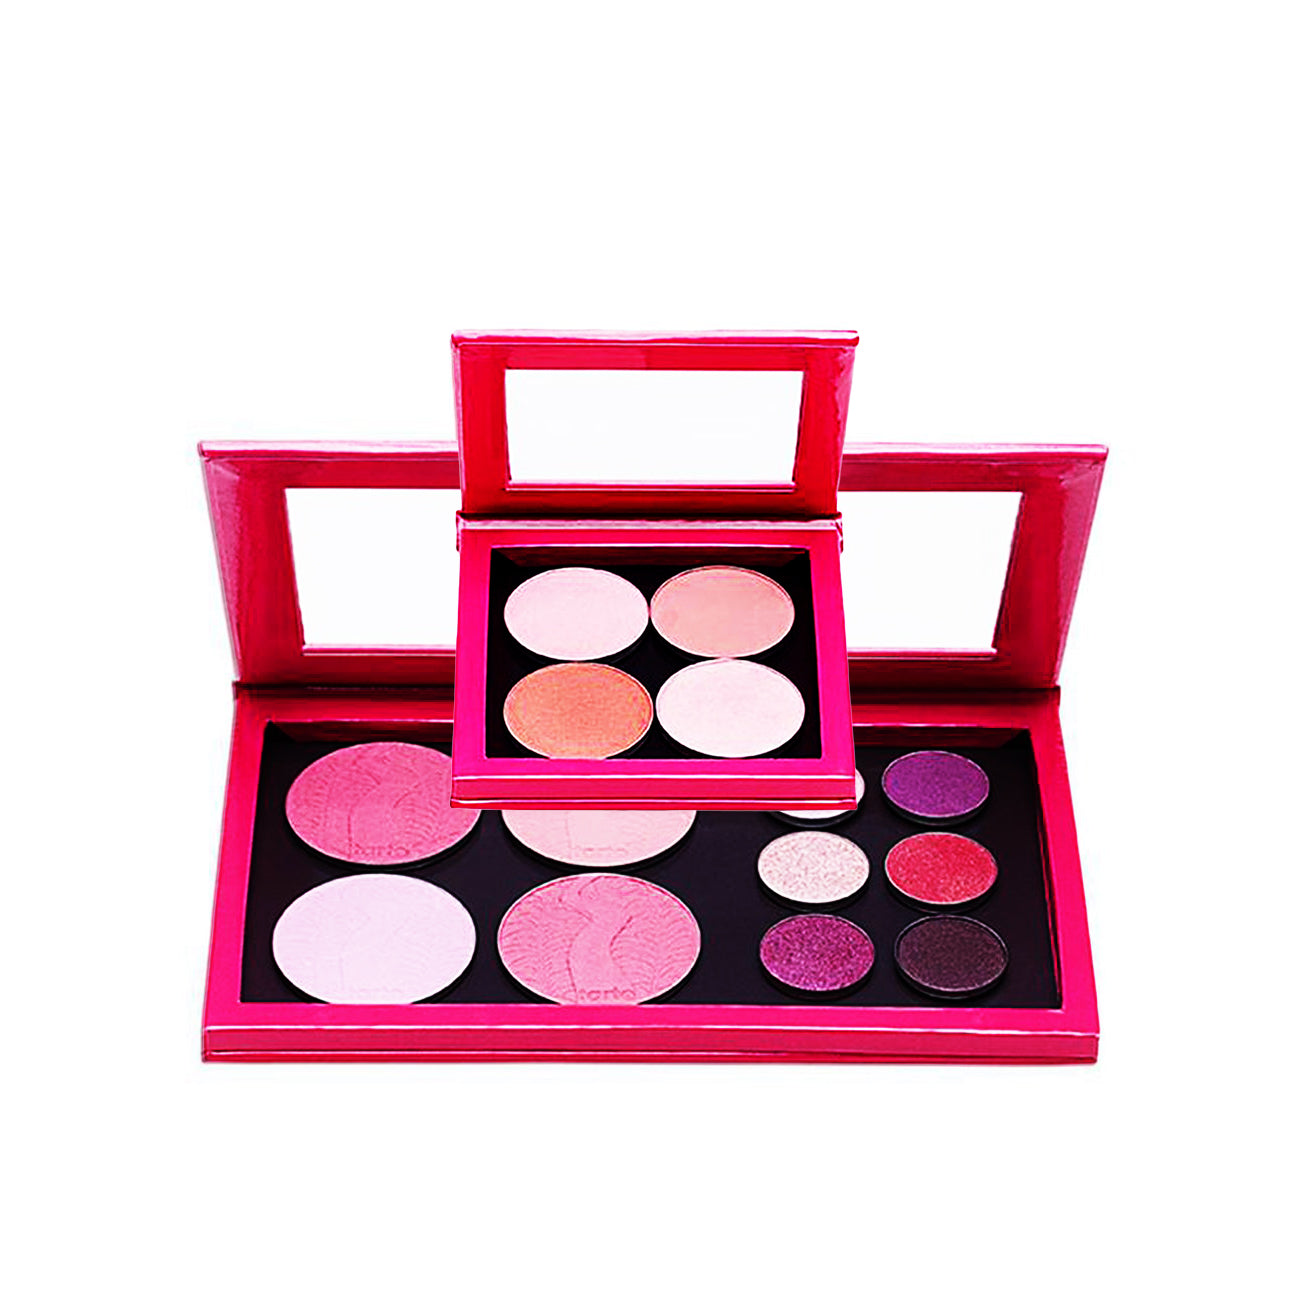 LARGE HOT PINK & SMALL HOT PINK Z PALETTES